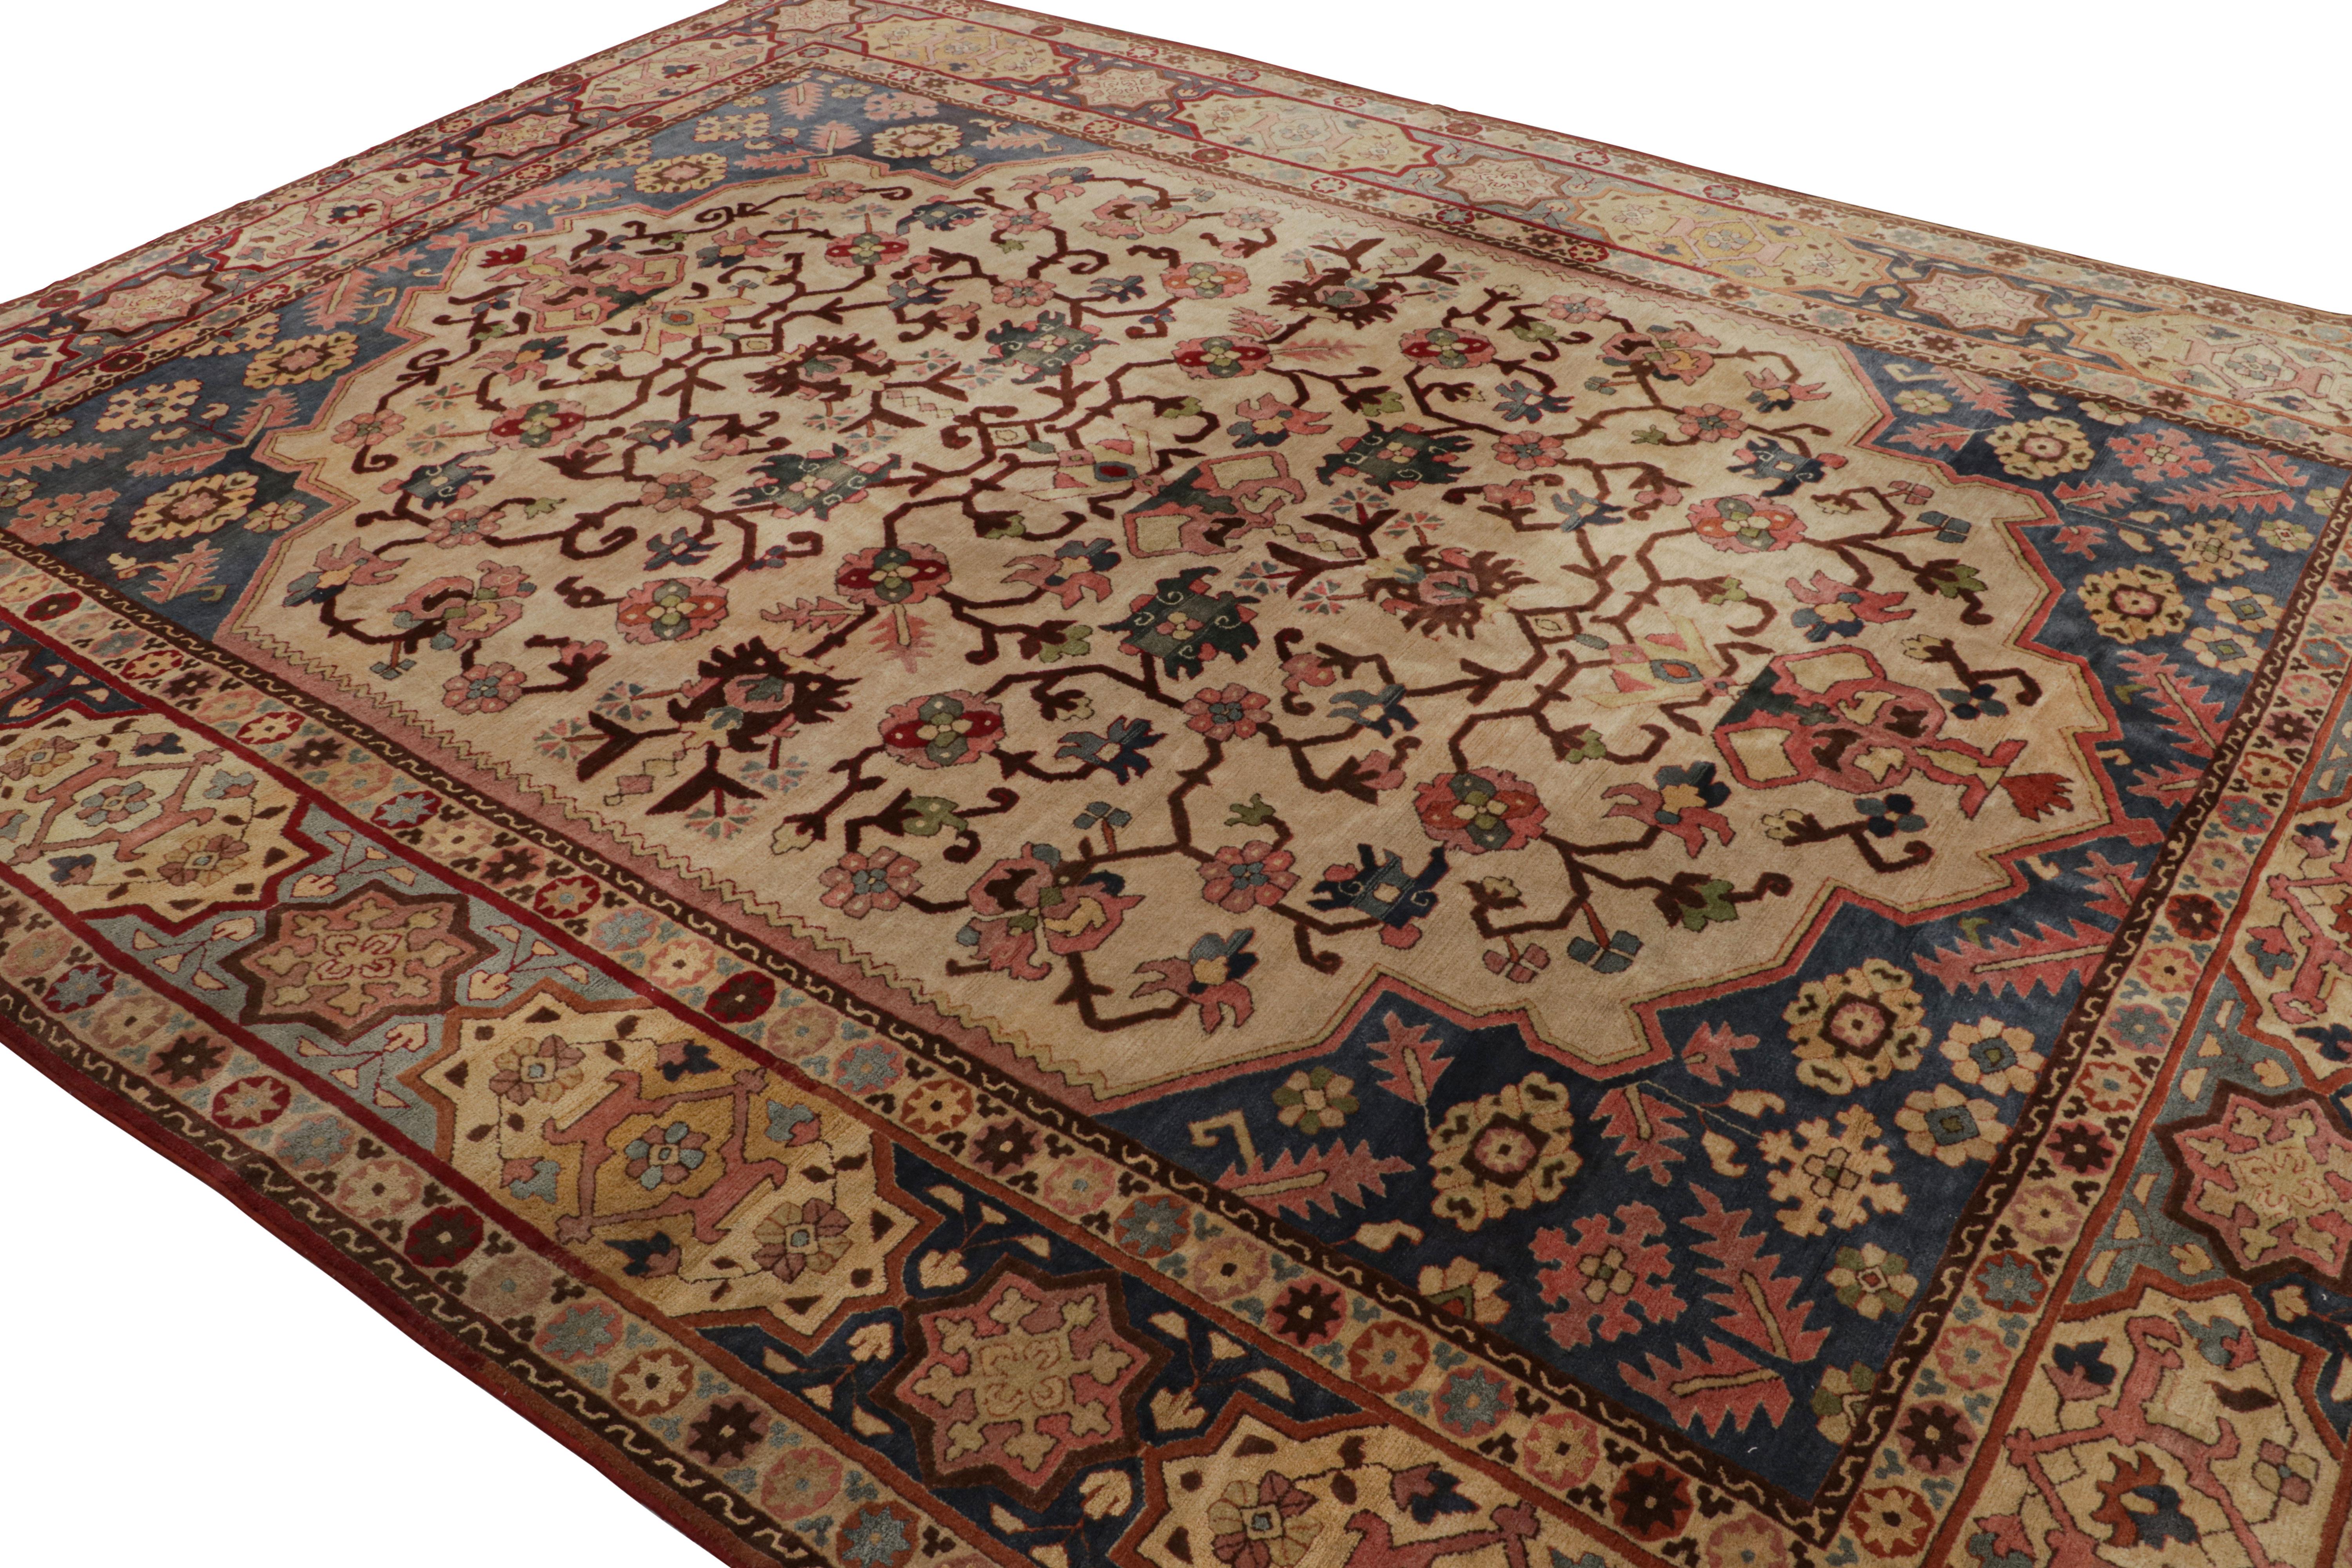 Made with wool and originating from Germany circa 1920, this piece is a rare 10x13 antique hooked rug. 

On the Design:

Specifically inspired by a 17th century Turkish rug, this piece is made with a traditional process similar to hooking as keen